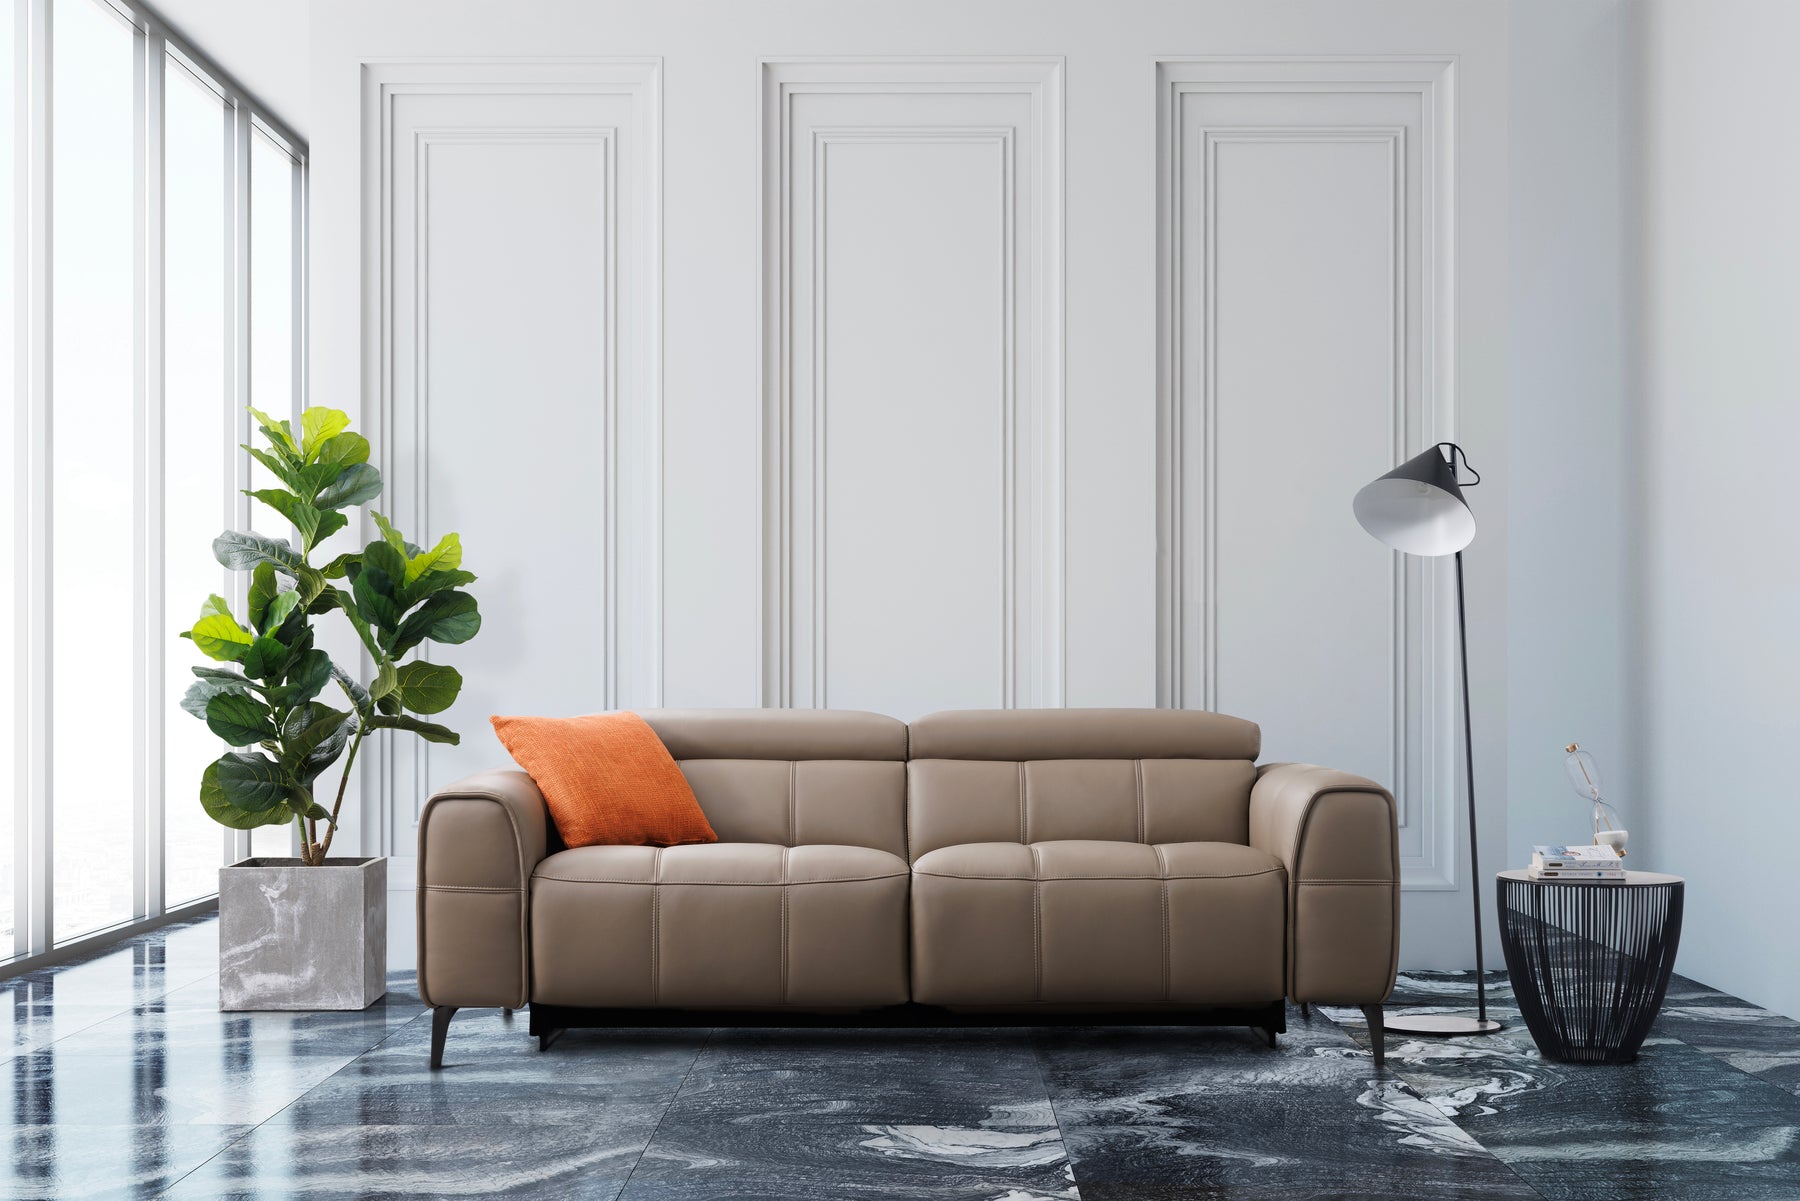 Style & Save Sofa Customisation Special : Capri 2.5 Seater Sofa in Signature Leather in Nude